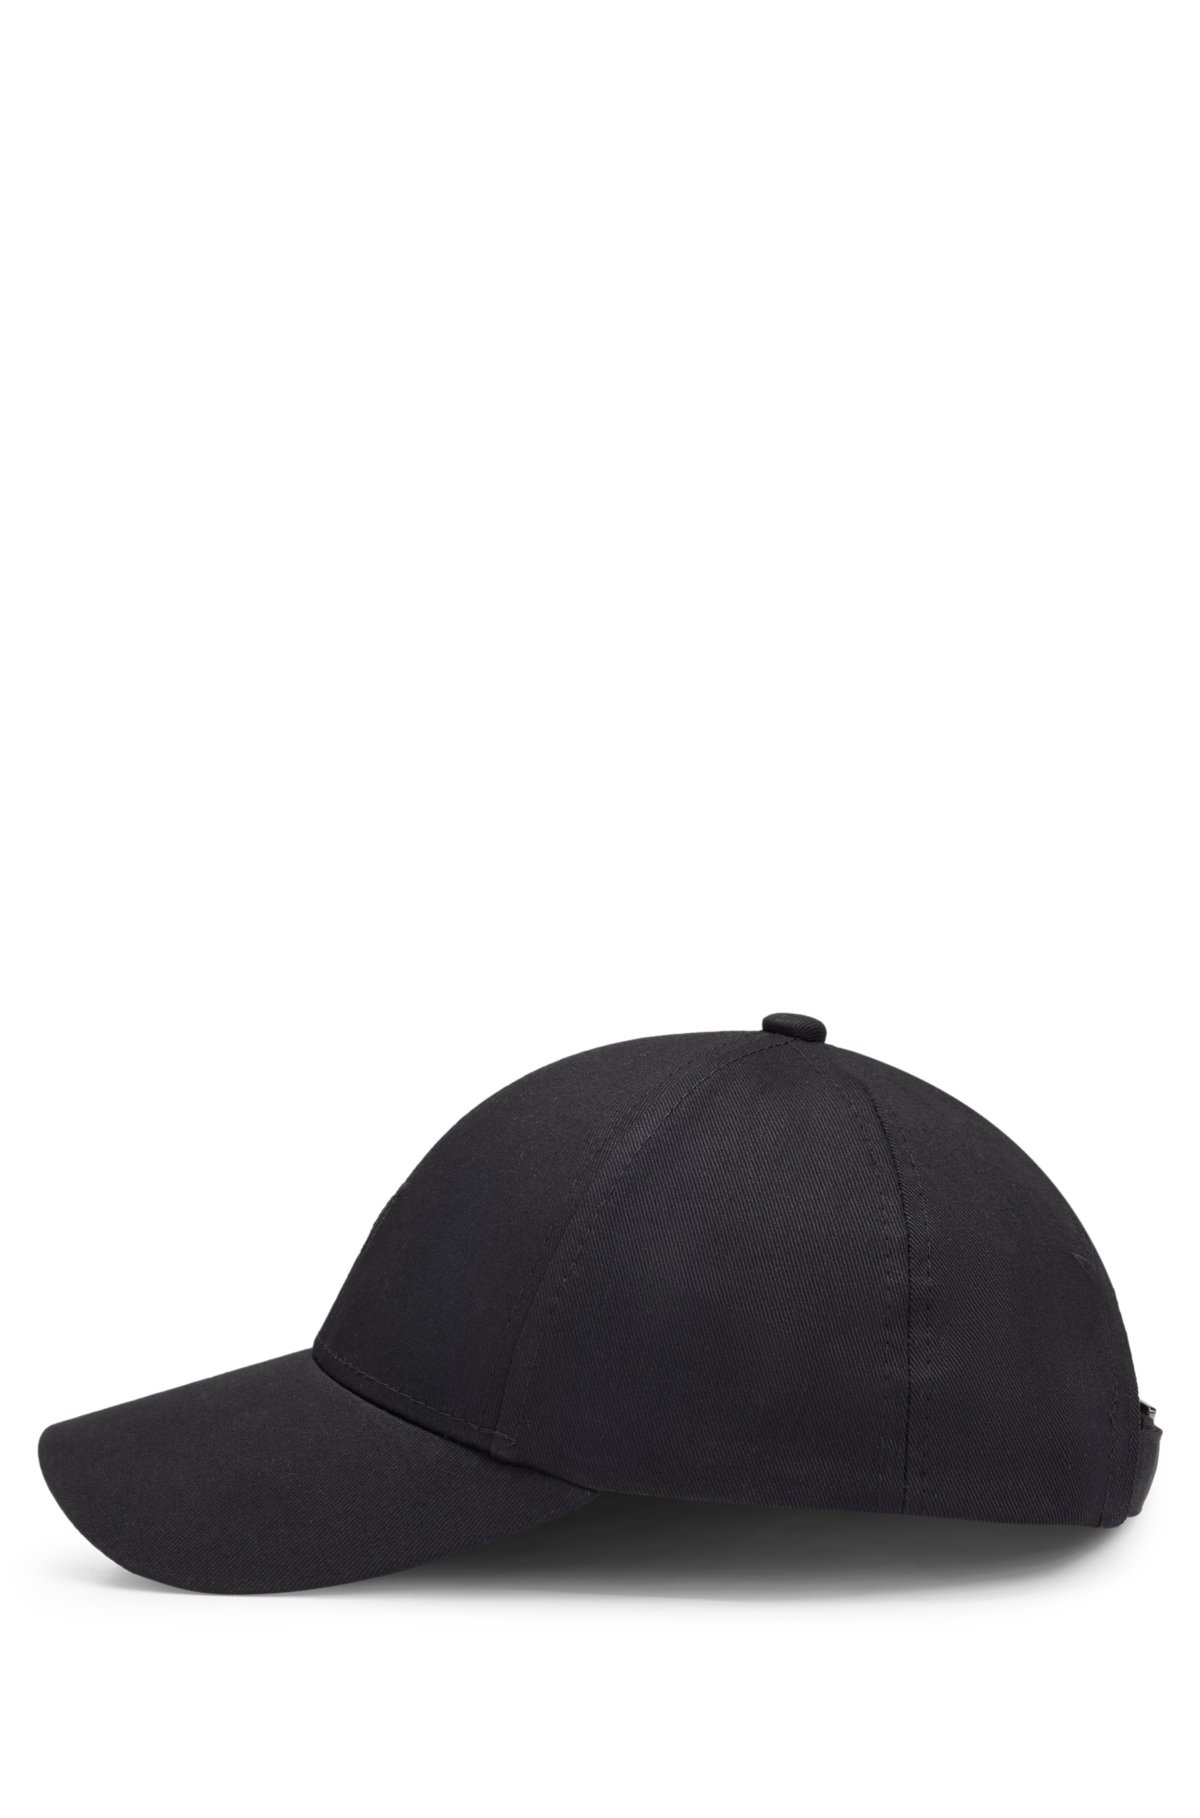 NAOMI x BOSS cotton-twill cap with 3D embroidery, Black